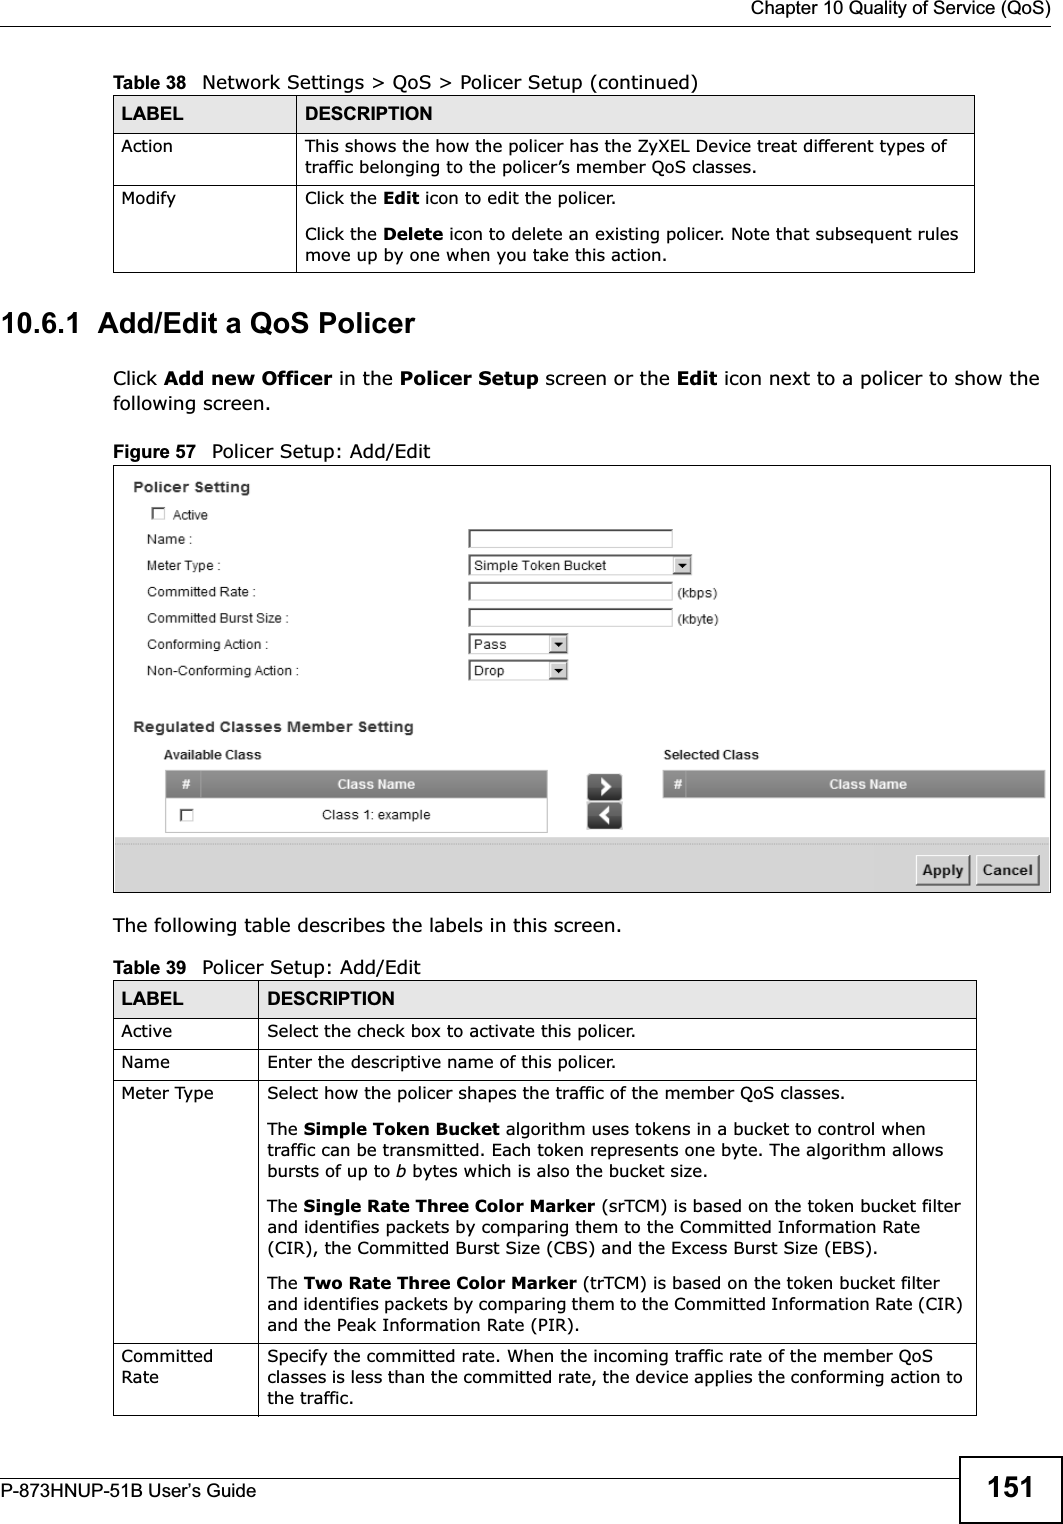  Chapter 10 Quality of Service (QoS)P-873HNUP-51B User’s Guide 15110.6.1  Add/Edit a QoS Policer Click Add new Officer in the Policer Setup screen or the Edit icon next to a policer to show the following screen. Figure 57   Policer Setup: Add/Edit The following table describes the labels in this screen. Action This shows the how the policer has the ZyXEL Device treat different types of traffic belonging to the policer’s member QoS classes.Modify Click the Edit icon to edit the policer.Click the Delete icon to delete an existing policer. Note that subsequent rules move up by one when you take this action.Table 38   Network Settings &gt; QoS &gt; Policer Setup (continued)LABEL DESCRIPTIONTable 39   Policer Setup: Add/EditLABEL DESCRIPTIONActive Select the check box to activate this policer.Name Enter the descriptive name of this policer.Meter Type Select how the policer shapes the traffic of the member QoS classes.The Simple Token Bucket algorithm uses tokens in a bucket to control when traffic can be transmitted. Each token represents one byte. The algorithm allows bursts of up to b bytes which is also the bucket size.The Single Rate Three Color Marker (srTCM) is based on the token bucket filter and identifies packets by comparing them to the Committed Information Rate (CIR), the Committed Burst Size (CBS) and the Excess Burst Size (EBS).The Two Rate Three Color Marker (trTCM) is based on the token bucket filter and identifies packets by comparing them to the Committed Information Rate (CIR) and the Peak Information Rate (PIR).Committed RateSpecify the committed rate. When the incoming traffic rate of the member QoS classes is less than the committed rate, the device applies the conforming action to the traffic.